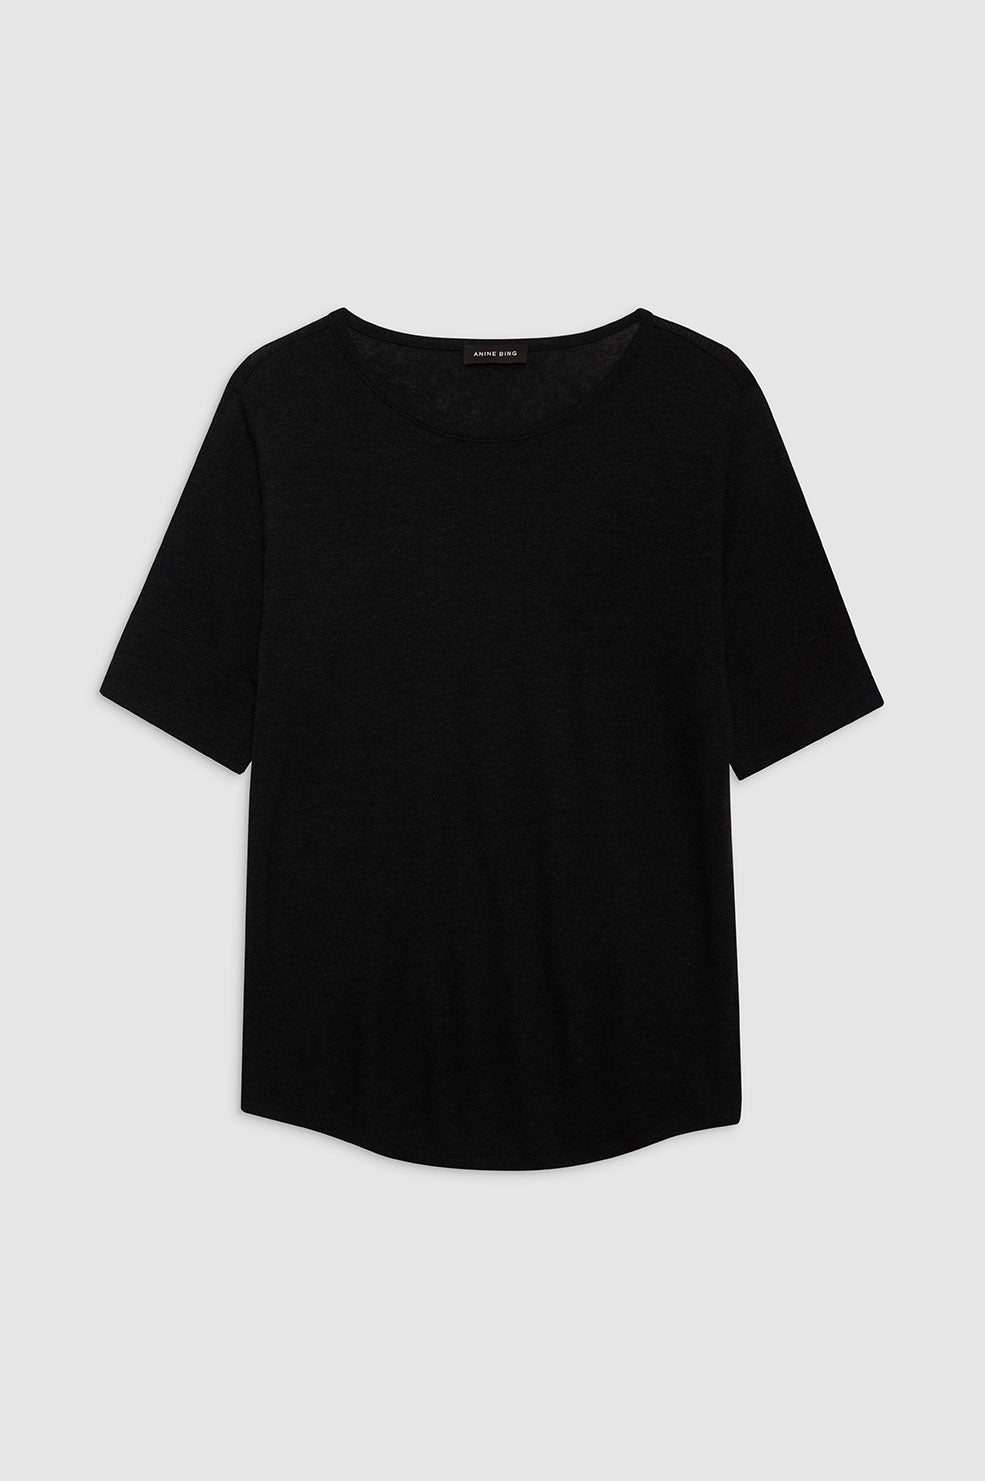 ANINE BING Shay Tee - Black Linen Blend - Front View